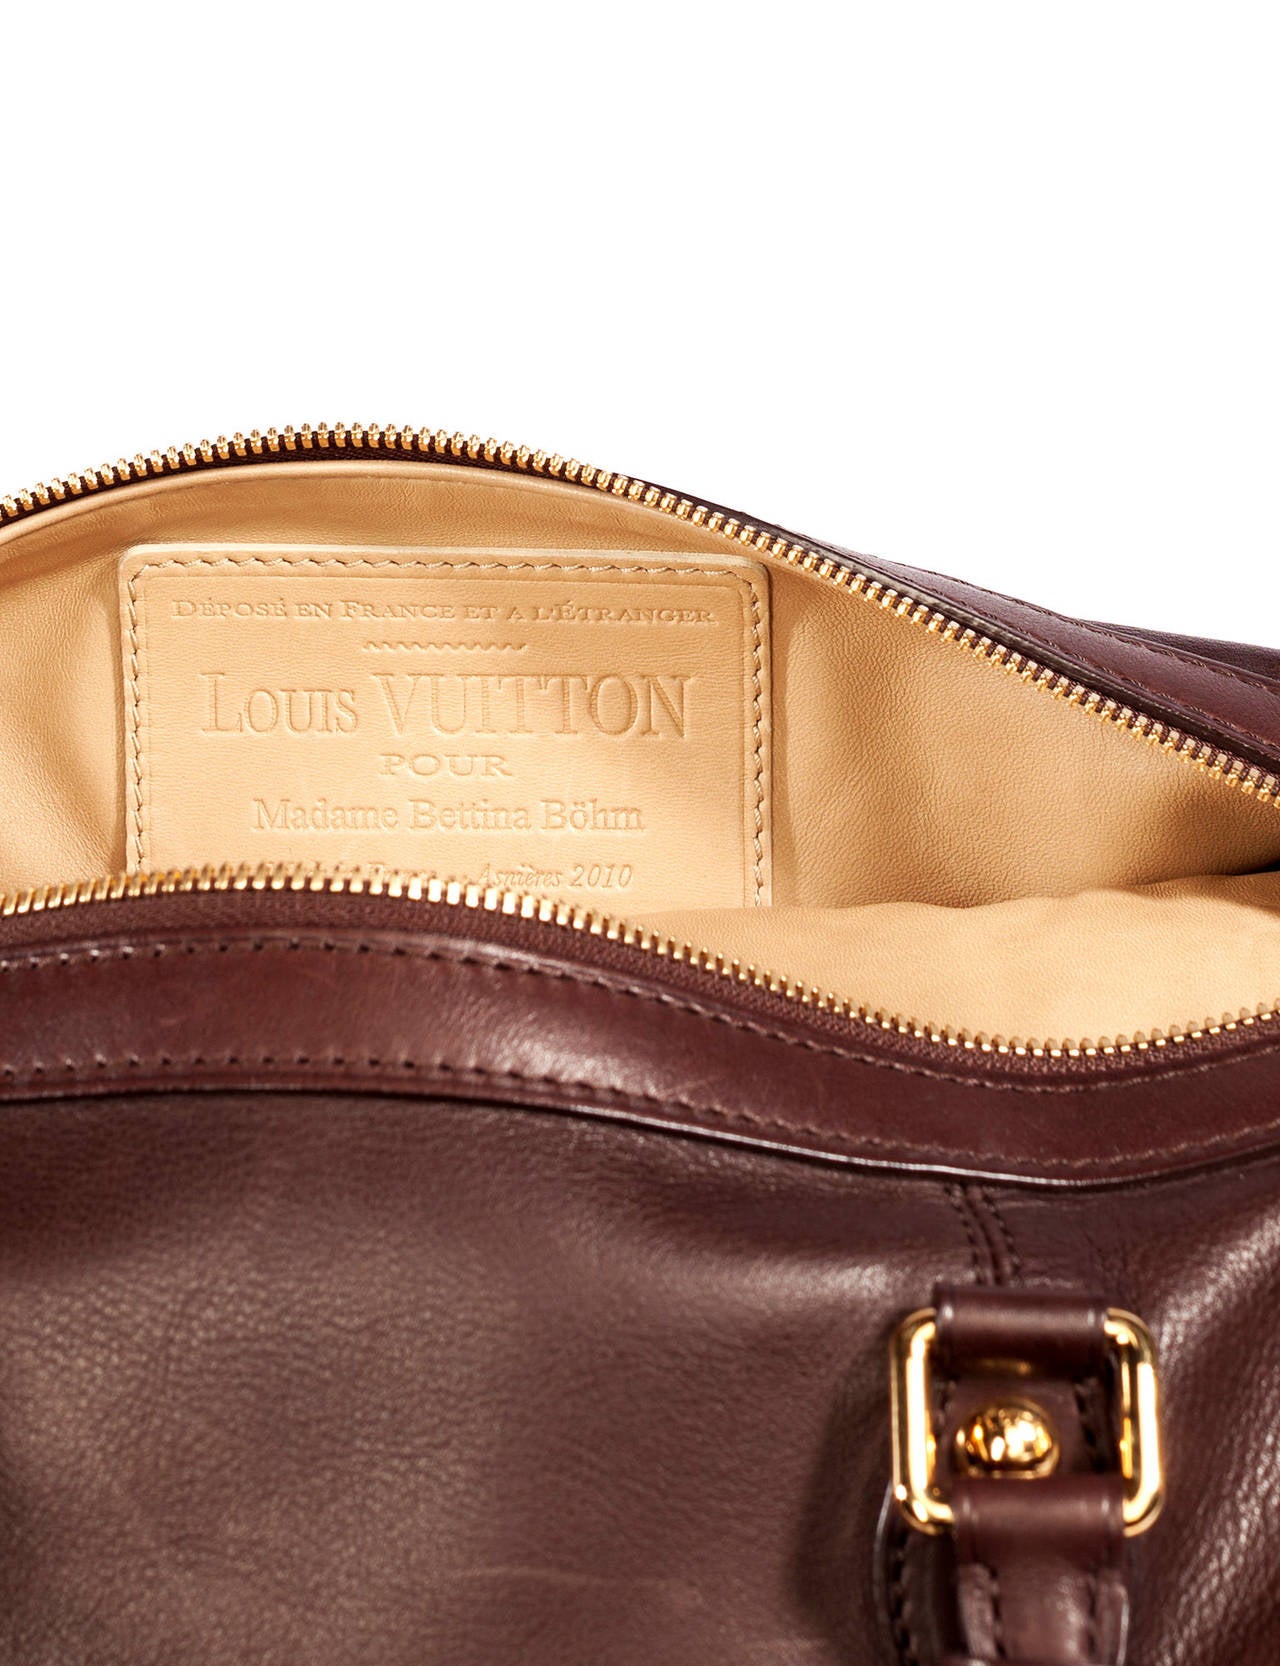 Louis Vuitton *Limited Edition* Customized Leather Tote 3